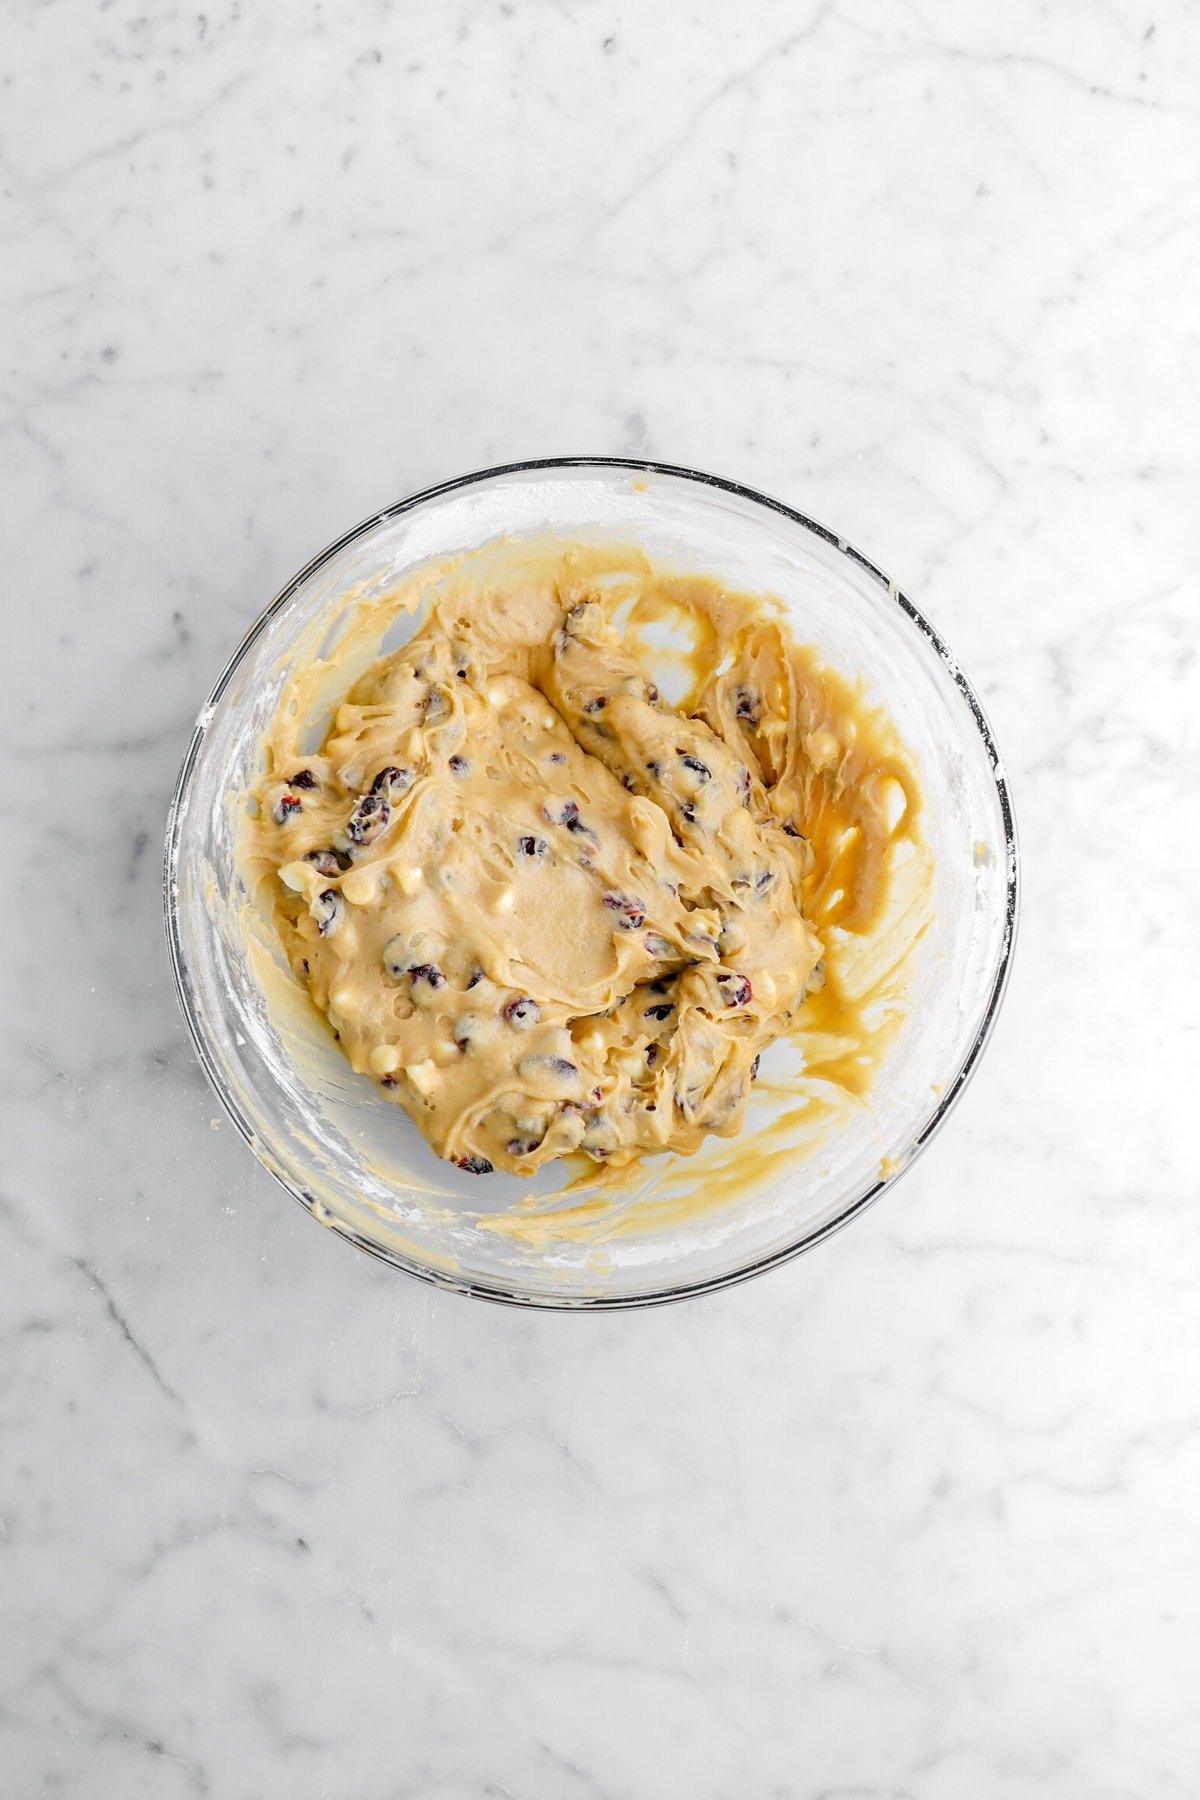 white chocolate cranberry blondie batter in glass bowl.